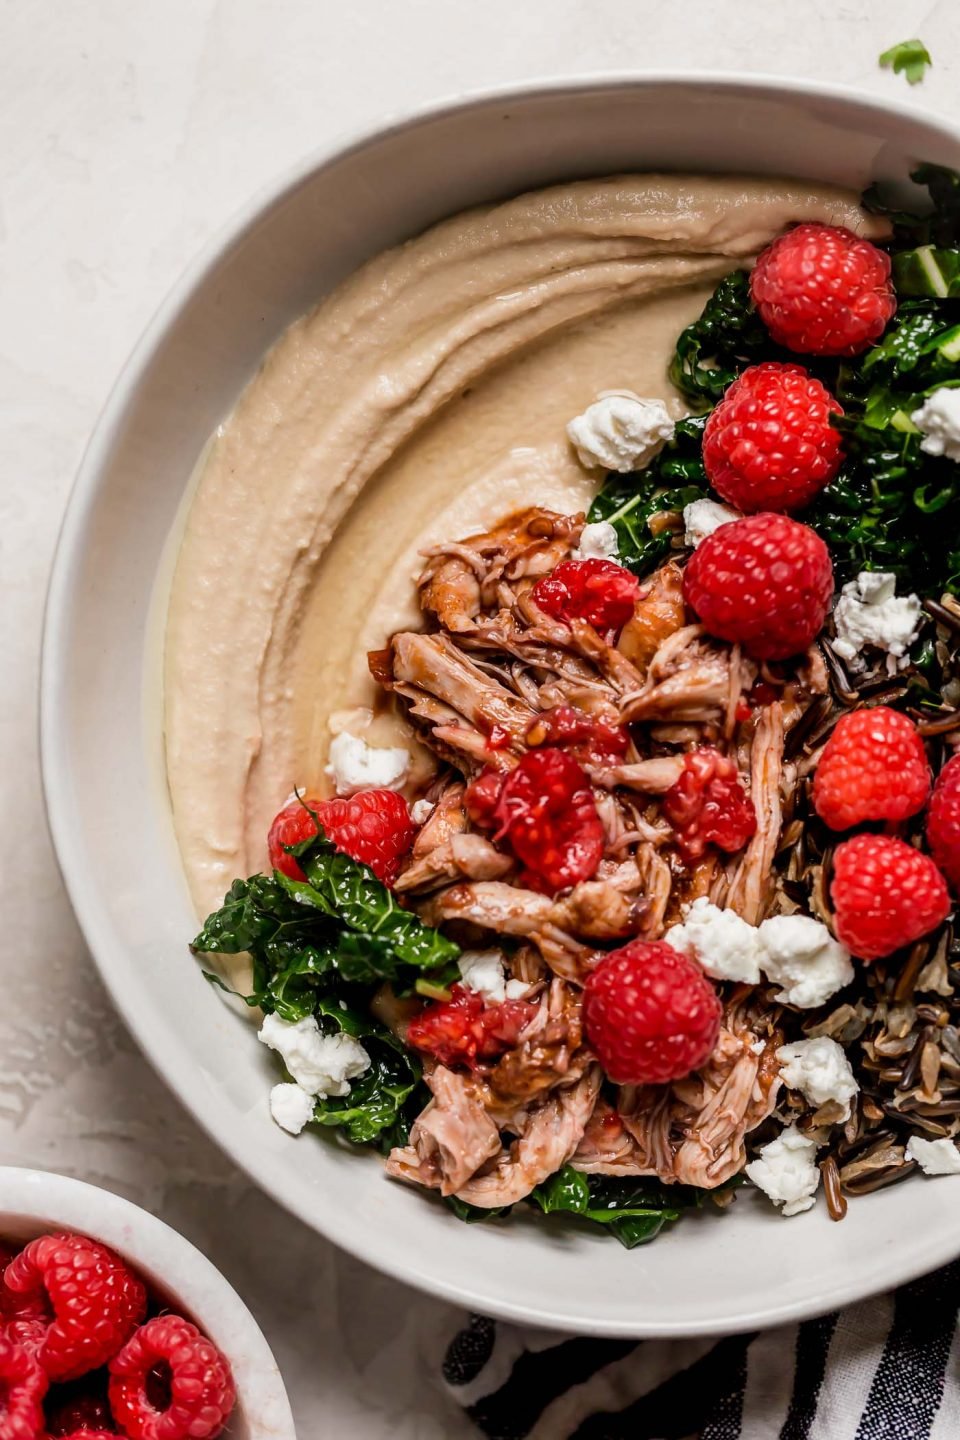 an easy one-skillet recipe for chipotle raspberry chicken, served overtop an autumn hummus bowl with creamy, garlicky hummus, finely shredded kale, wild rice, goat cheese, & some extra raspberries. chipotle raspberry chicken autumn hummus bowls are the perfect healthy & easy weeknight dinner, or an easy meal to prep for grab-&-go lunches this week! #hummusbowl #chipotleraspberrychicken #raspberryrecipes #raspberrydinnerrecipes #healthyrecipe #skilletrecipe #bowlrecipe #easyrecipe #mealprep